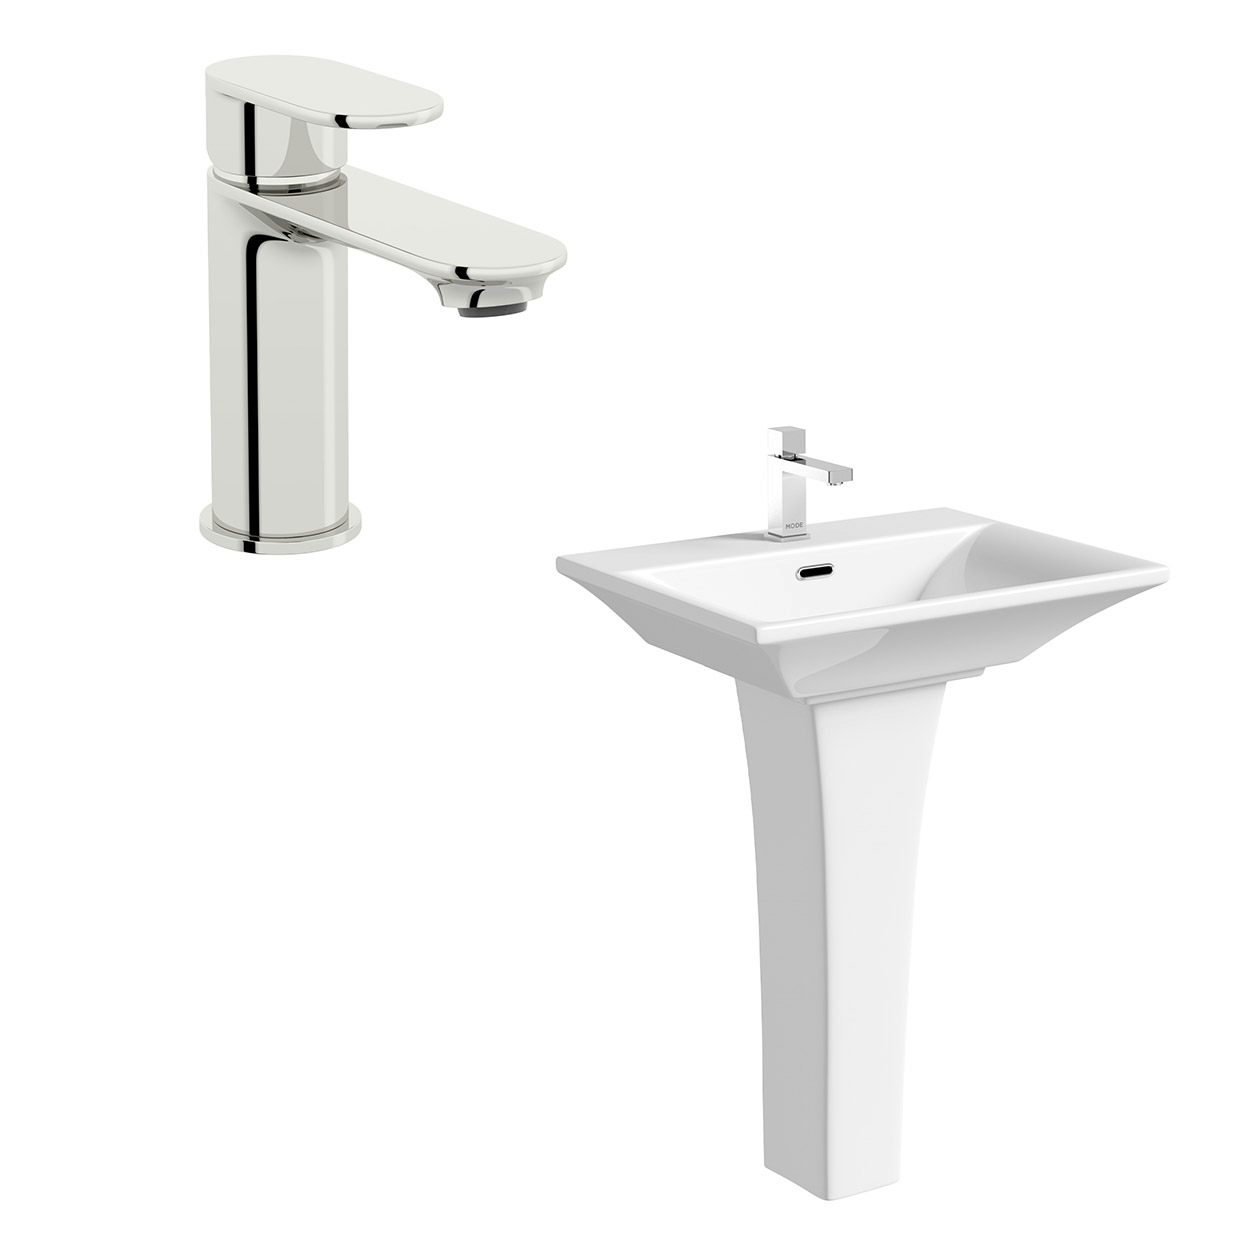 Mode Austin 1 tap hole full pedestal basin 600mm with tap